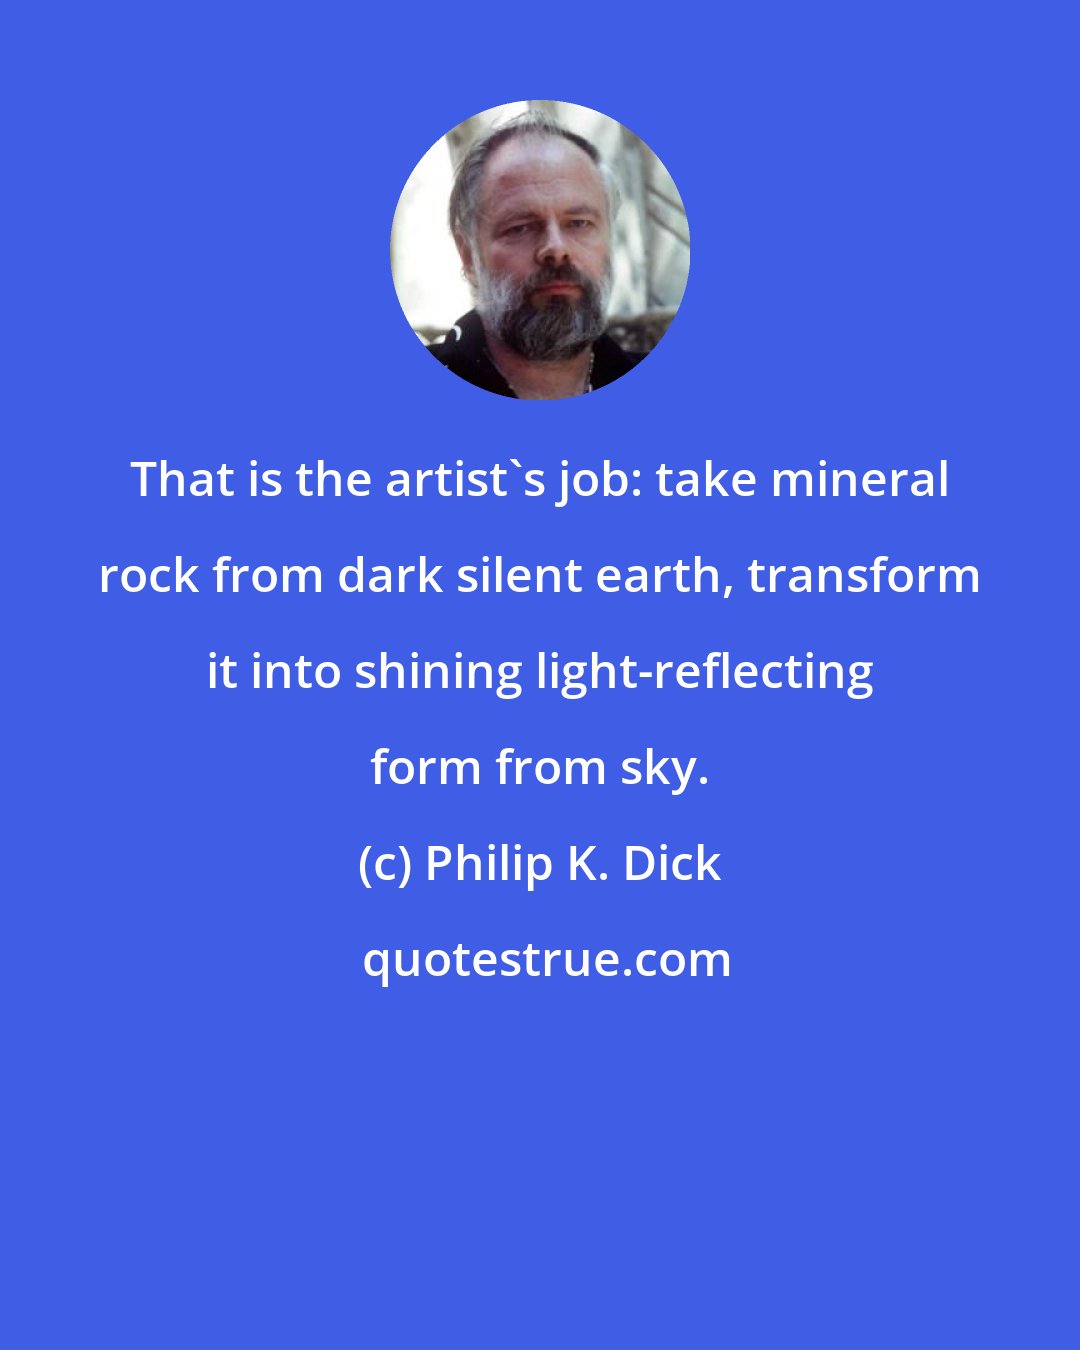 Philip K. Dick: That is the artist's job: take mineral rock from dark silent earth, transform it into shining light-reflecting form from sky.